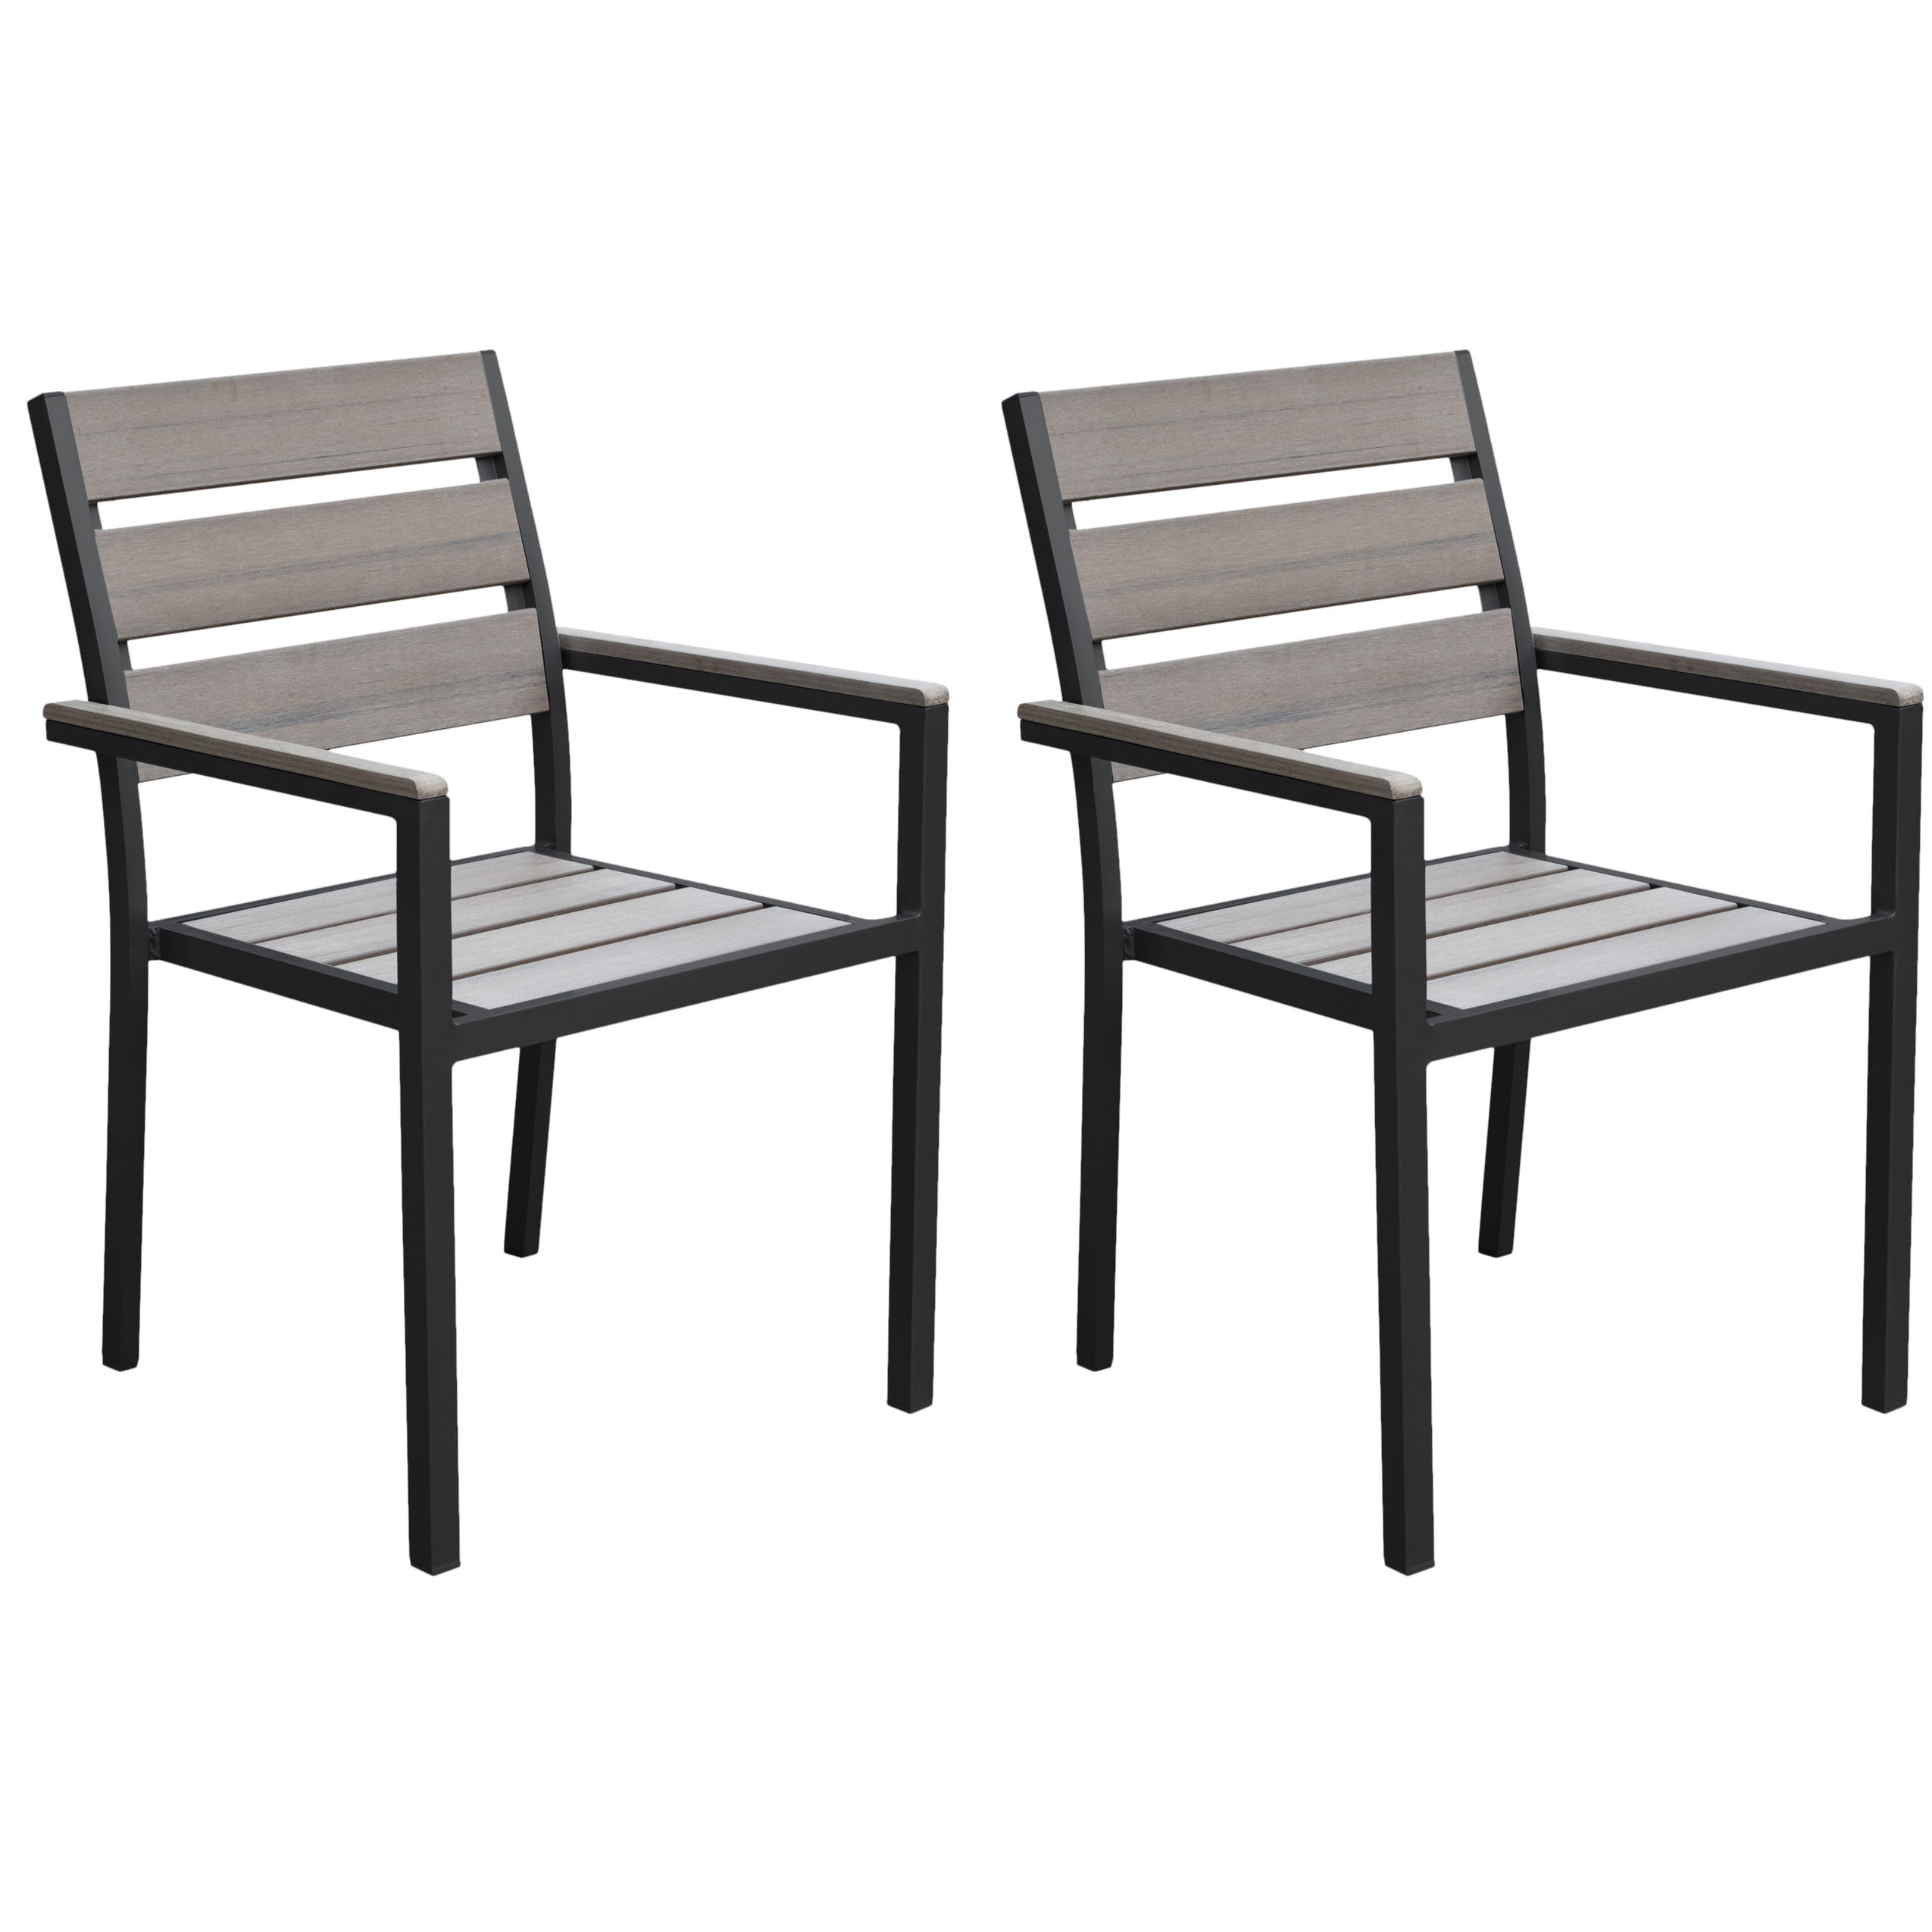 Gallant Set of 2 Stackable Black Powder Coated Aluminum Frame Stationary Dining Chair(s) with Slat Seat | - CorLiving PJR-671-C